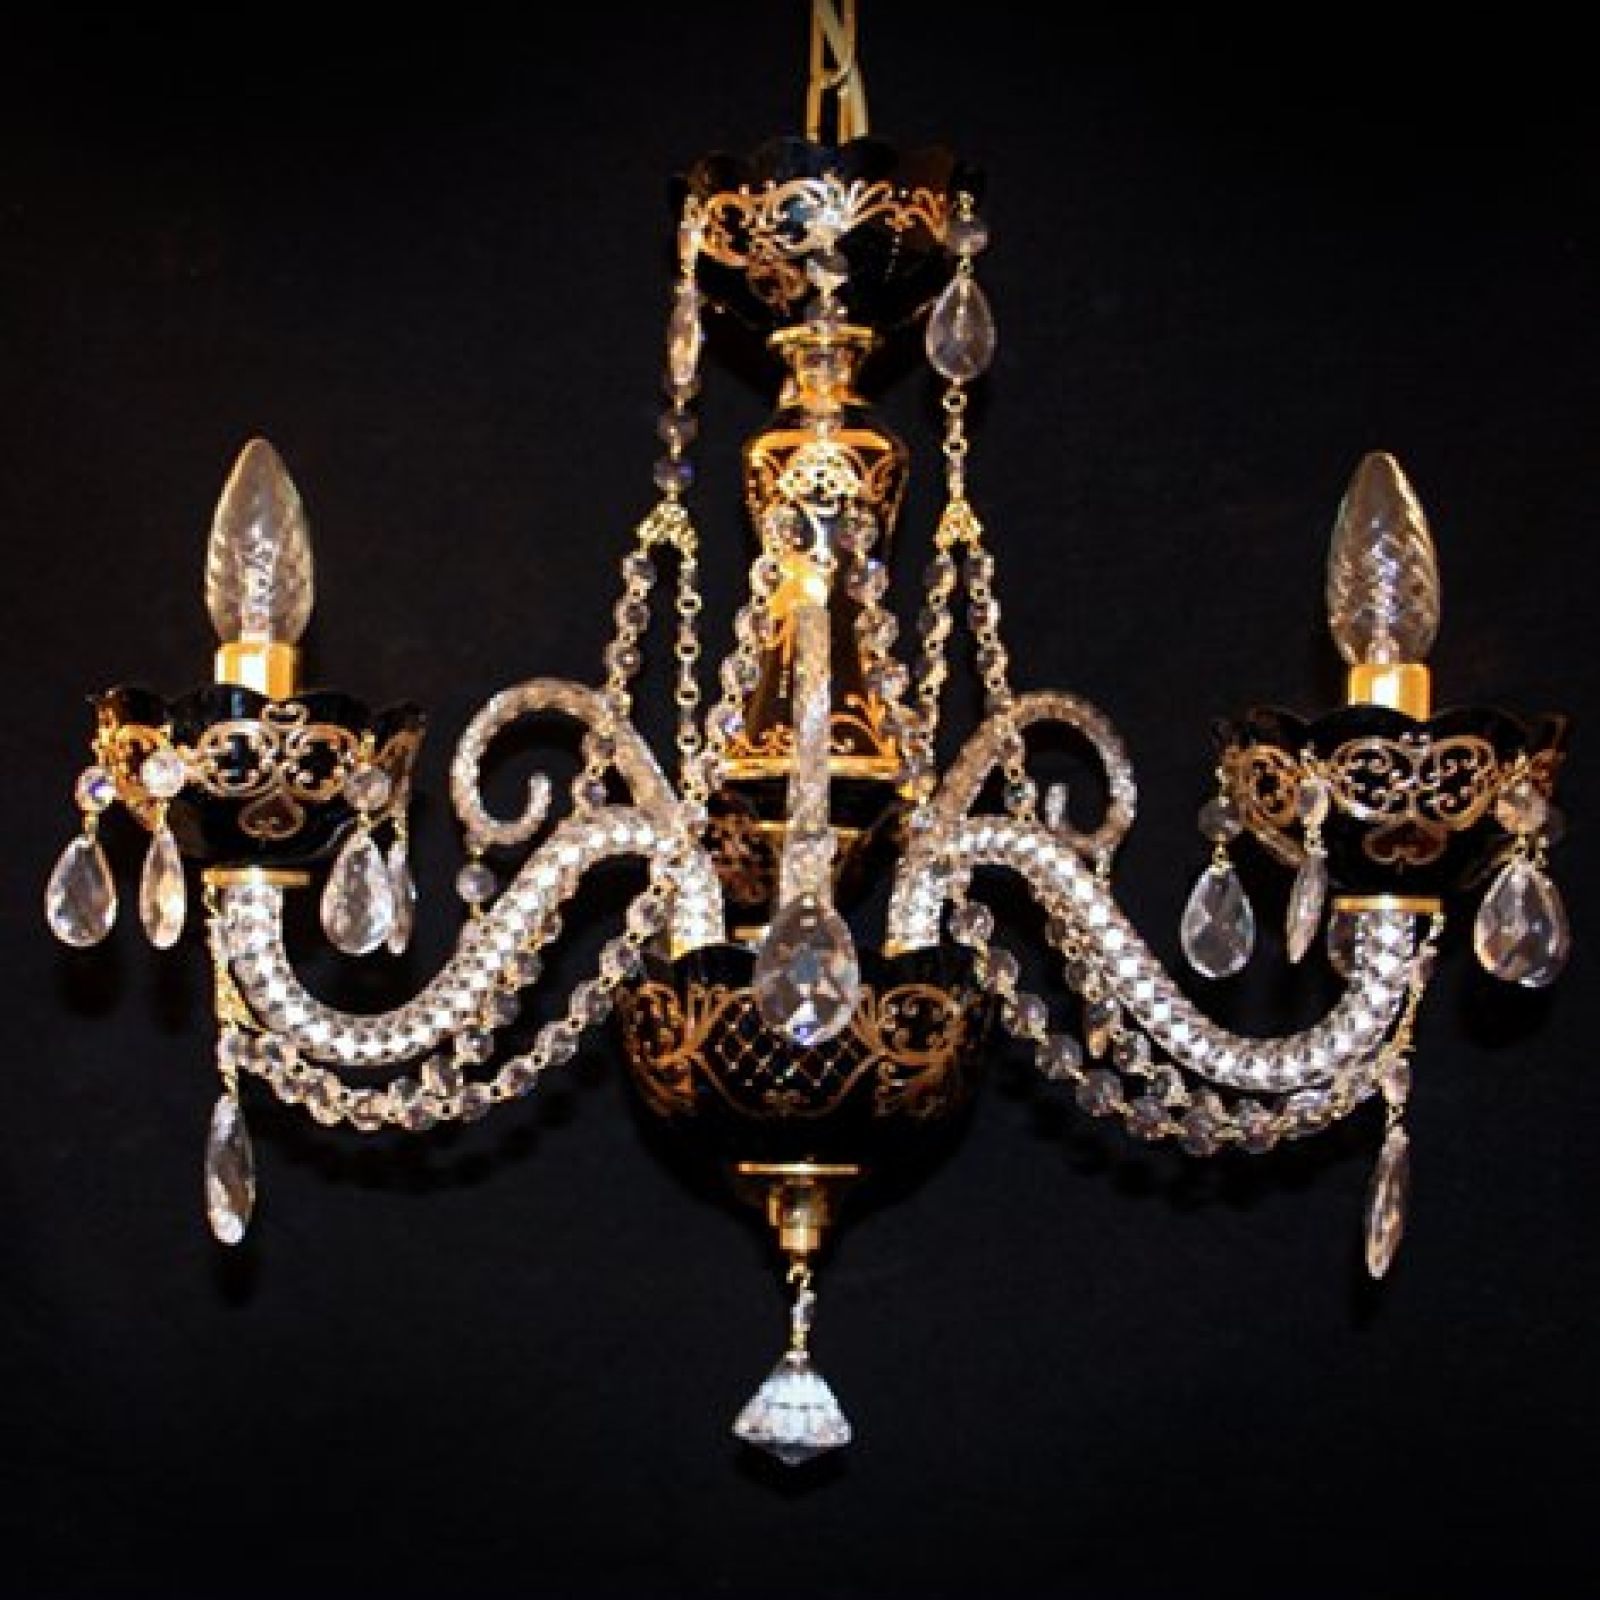 Coloured chandelier with handpainted gold detail